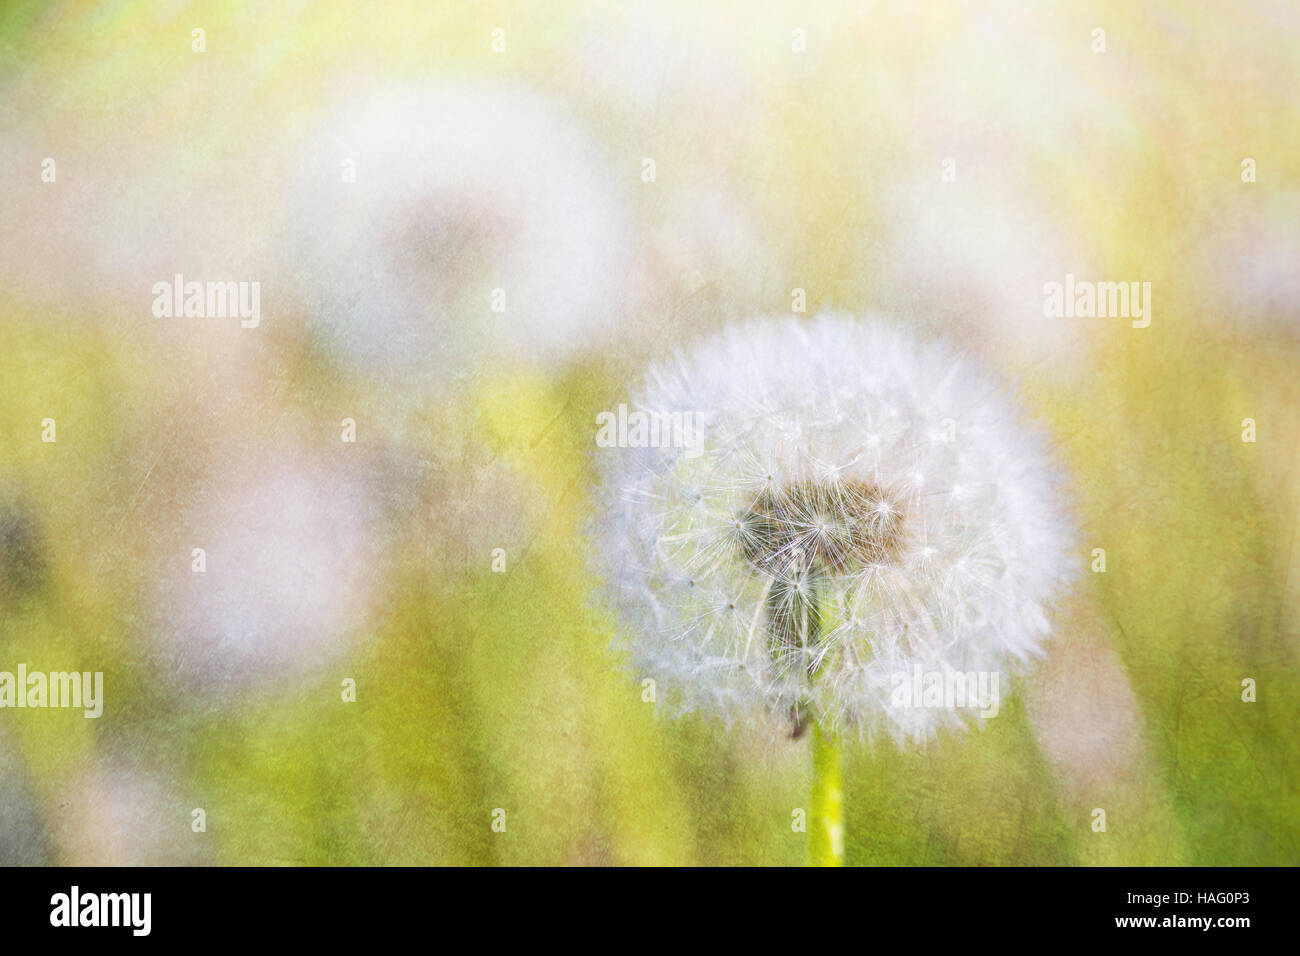 A meadow full of dandelions gone to seed. Vintage texture applied. Stock Photo